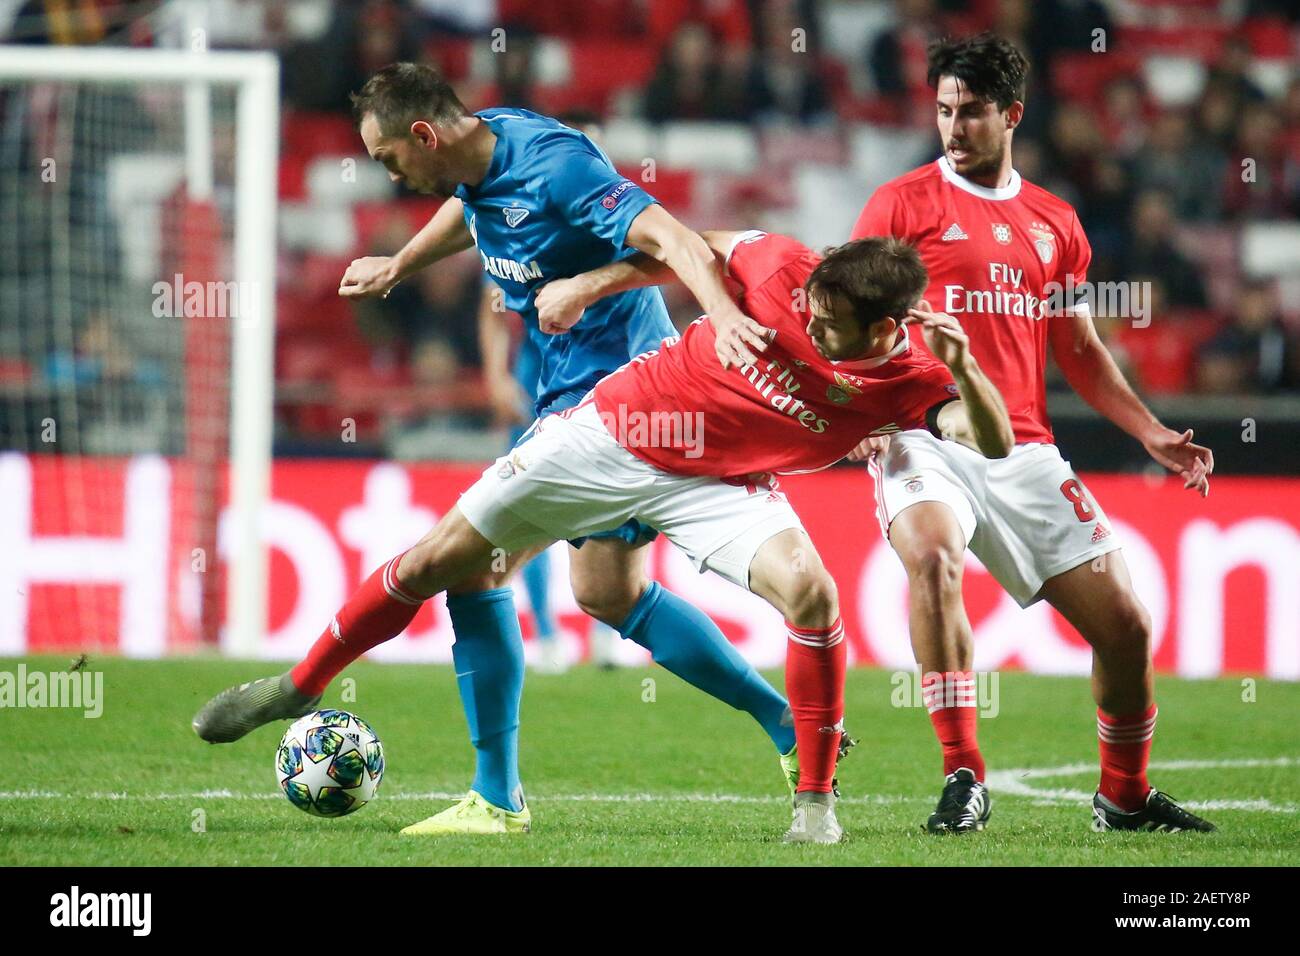 Saint Petersburg, Russia. 10th Dec, 2019. Chiquinho (Francisco Leonel Lima Silva Machado) (C) of Benfica and Artem Dzyuba (L) of Zenit are seen in action during the UEFA Champions League group G match between SL Benfica Lisbon and Zenit at Gazprom Arena in St. Petersburg.(Final score; SL Benfica Lisbon 3:0 Zenit) Credit: SOPA Images Limited/Alamy Live News Stock Photo